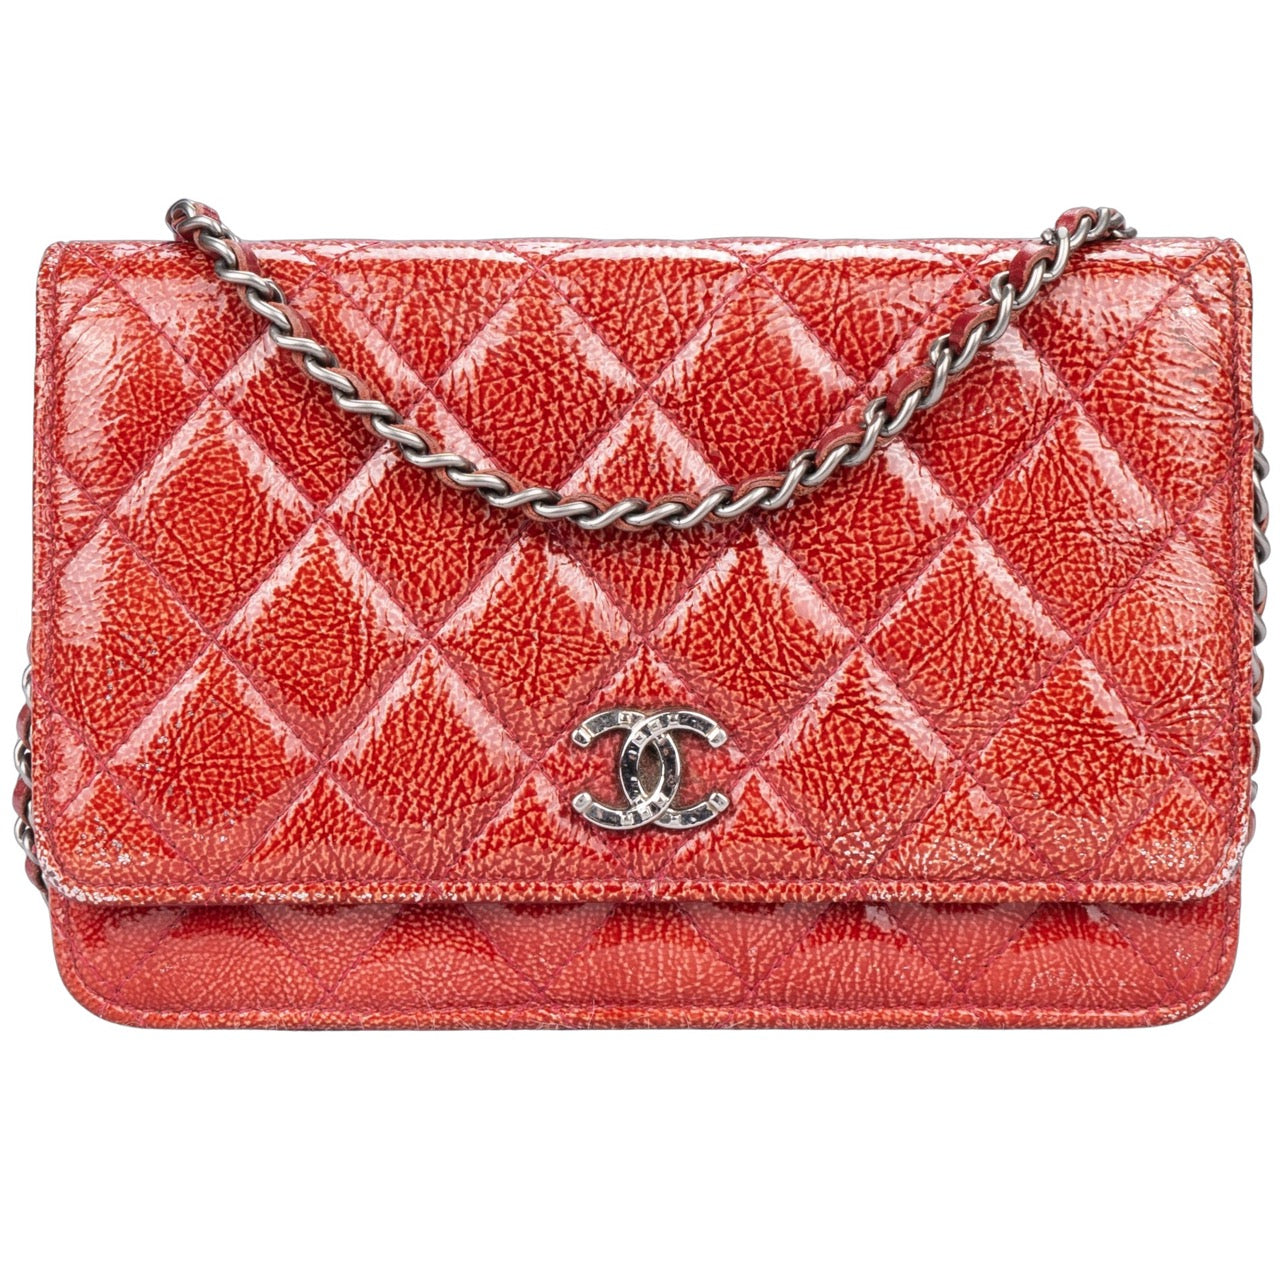 Chanel Soft Leather Wallet On Chain Crossbody Bag